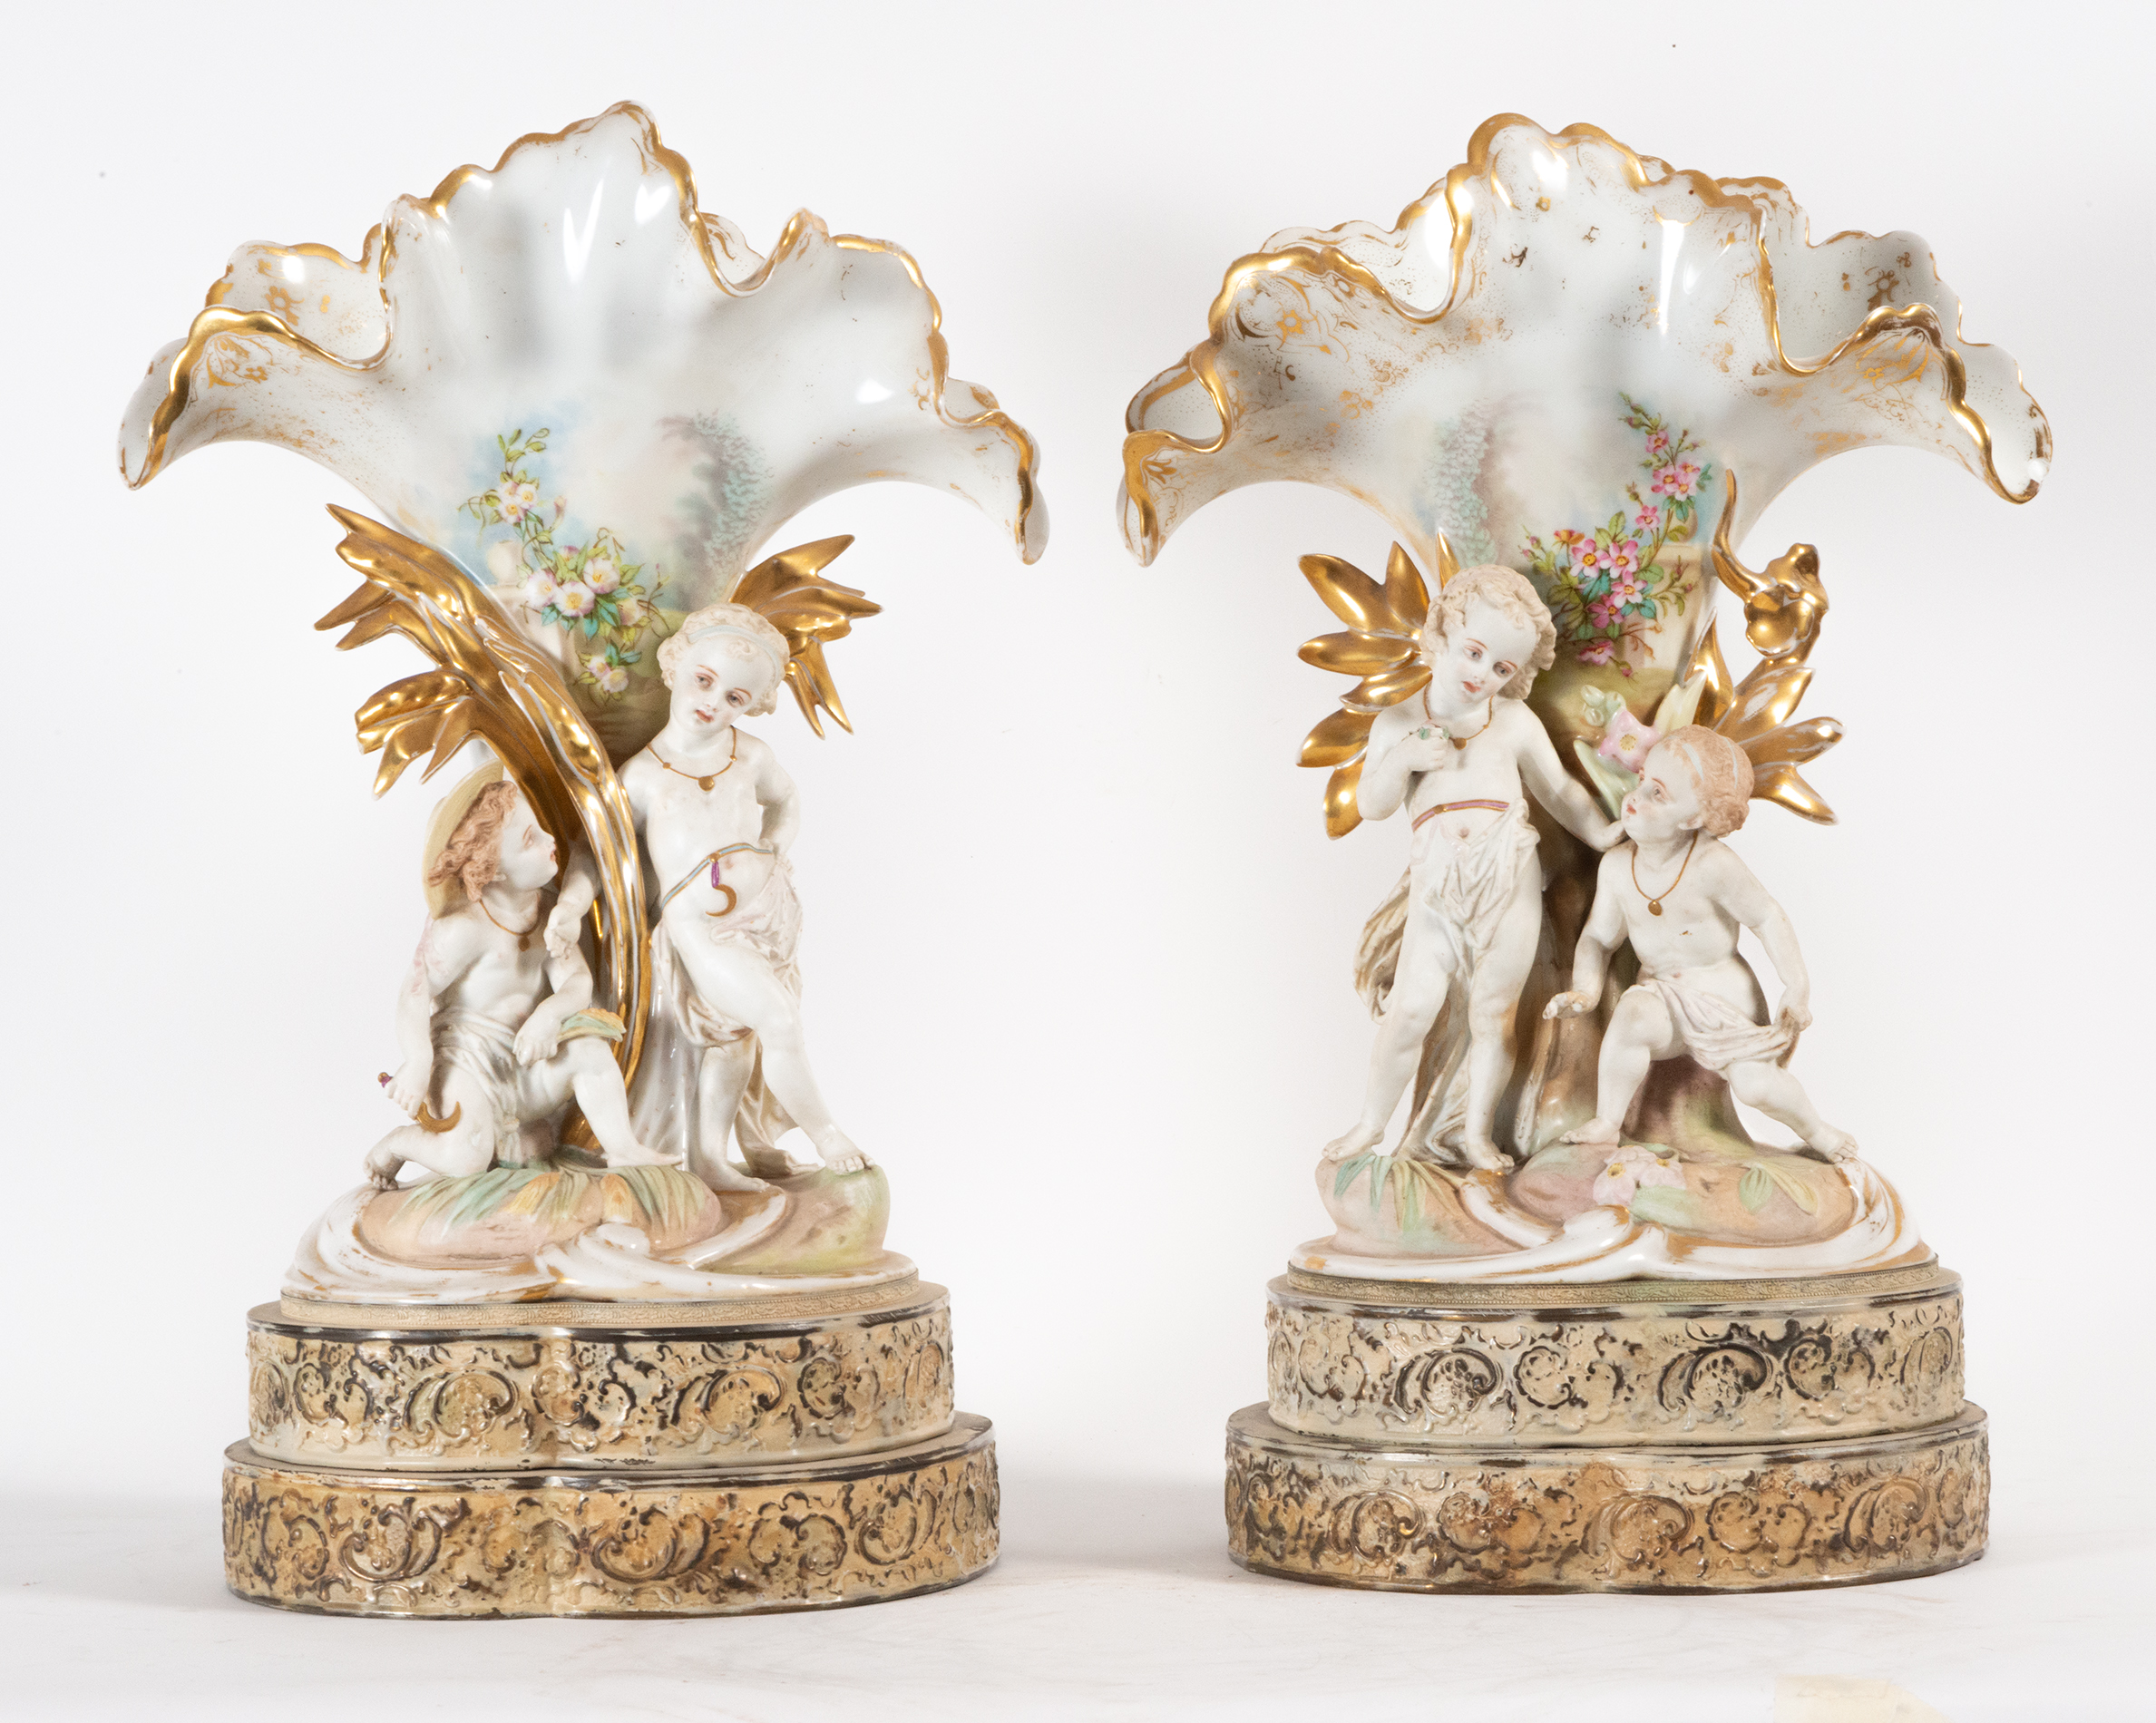 Pair of Vases with Little Shepherds in glazed biscuit porcelain, 19th century